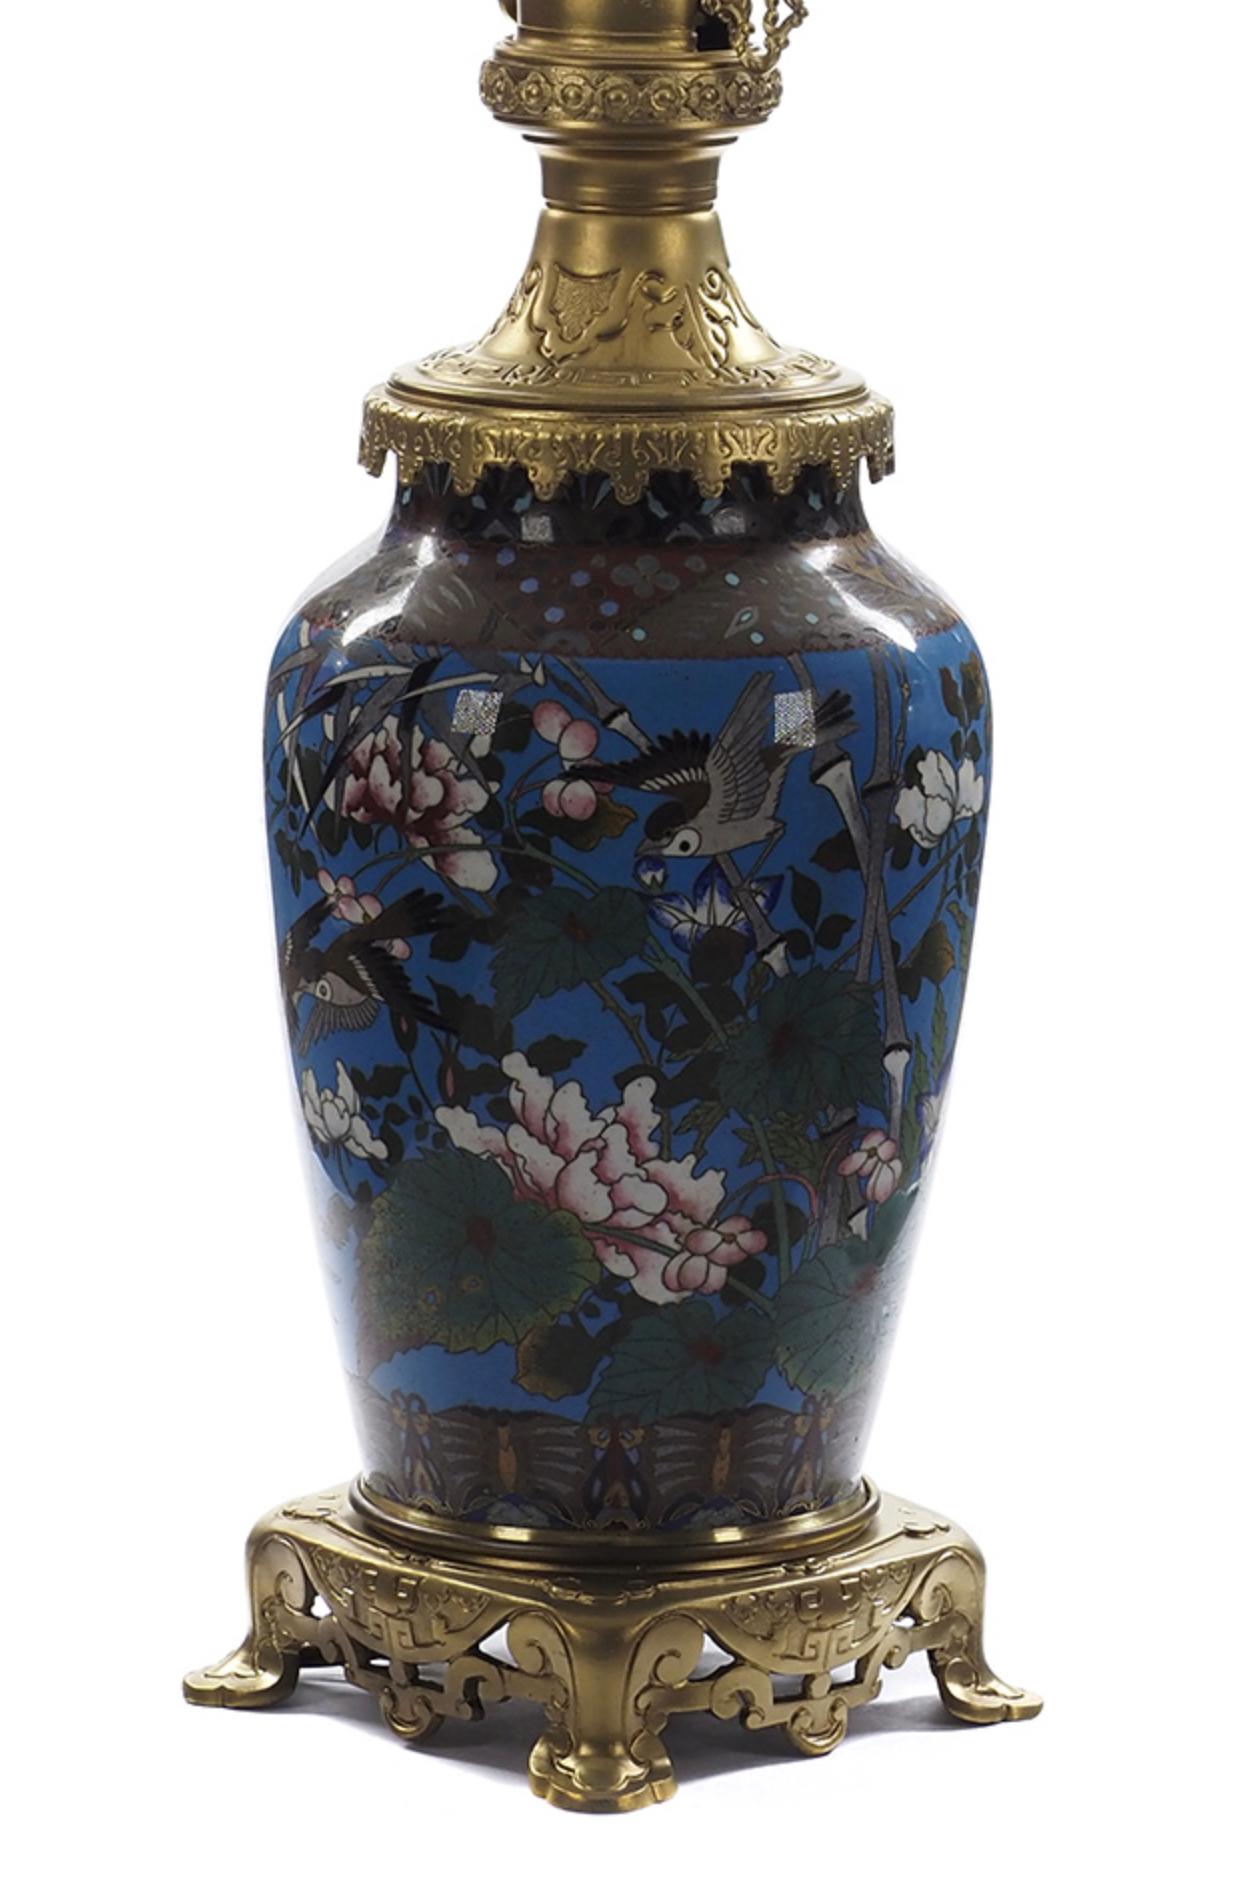 A PAIR OF CHINESE CLOISONNÉ VASES MOUNTED AS LAMPS

In the 17th century England & Holland, two small, warlike seafaring nations vied for supremacy in the newly established trade in the then extraordinary commodities, such as spices, silks,